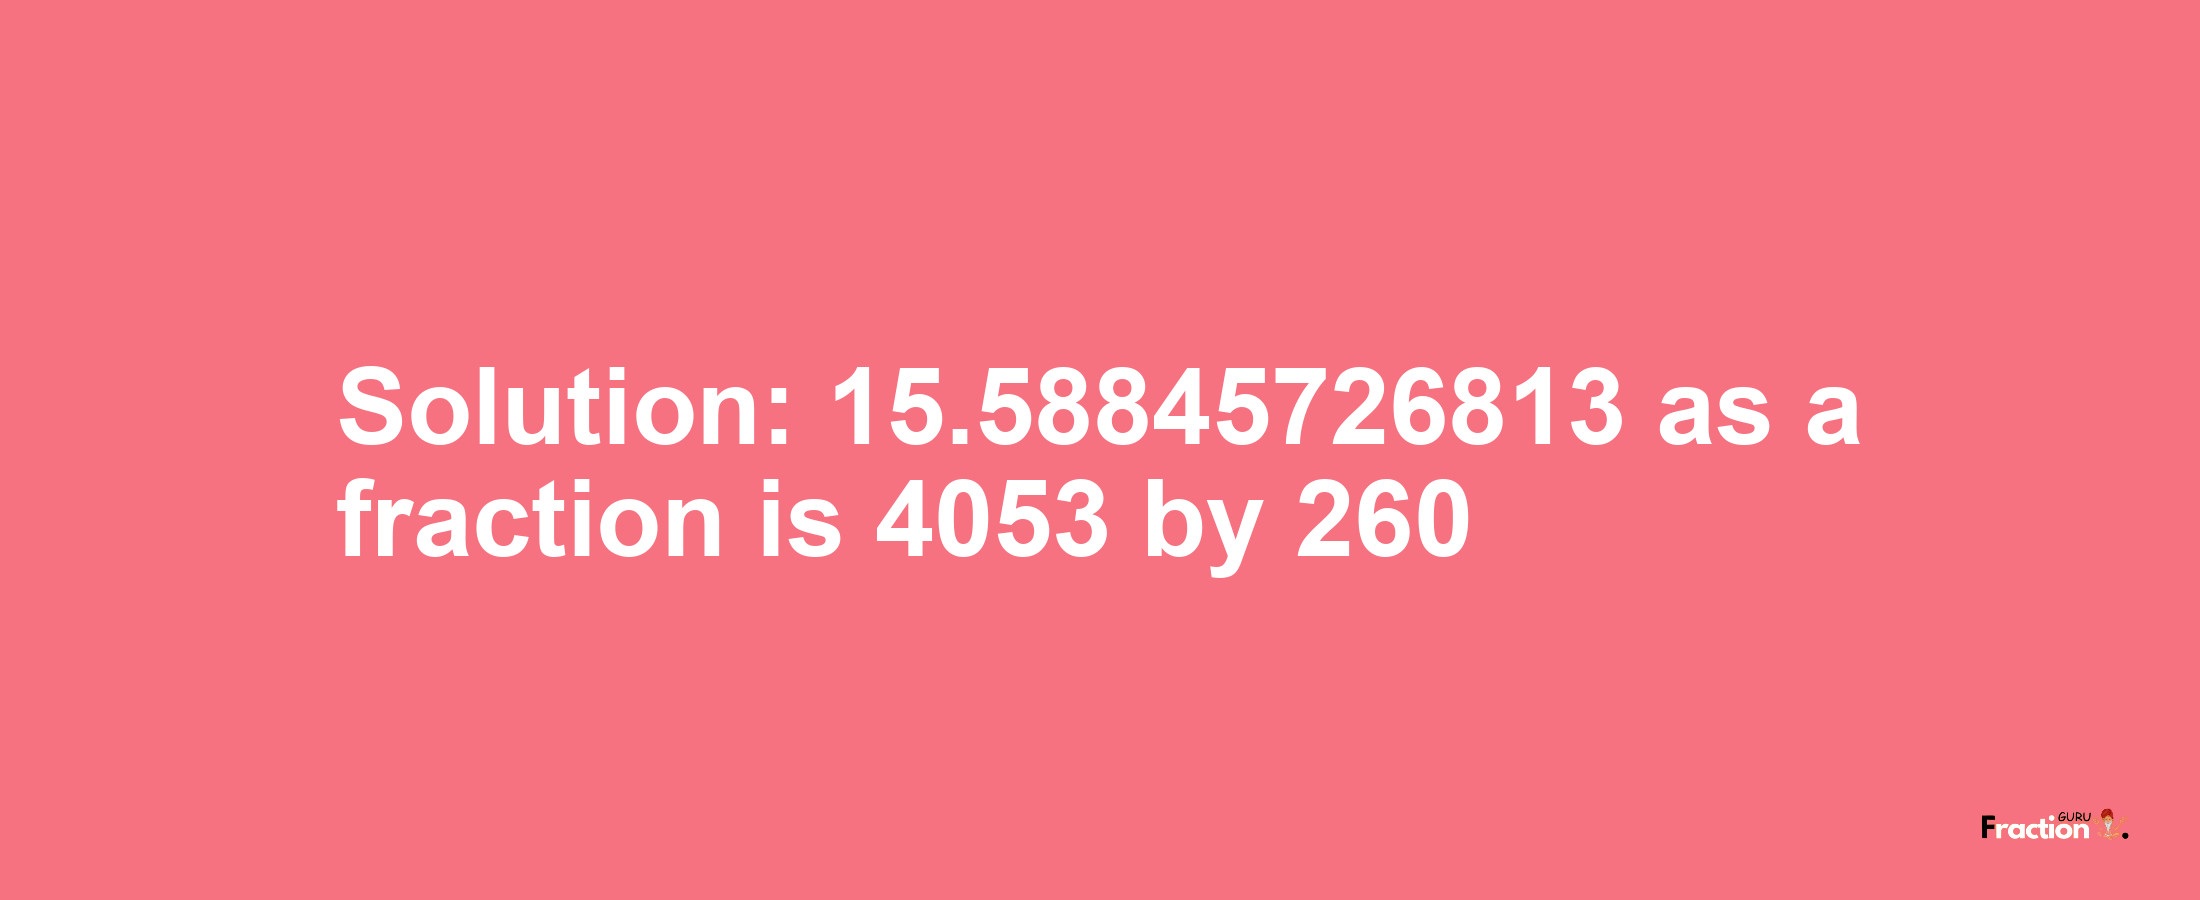 Solution:15.58845726813 as a fraction is 4053/260